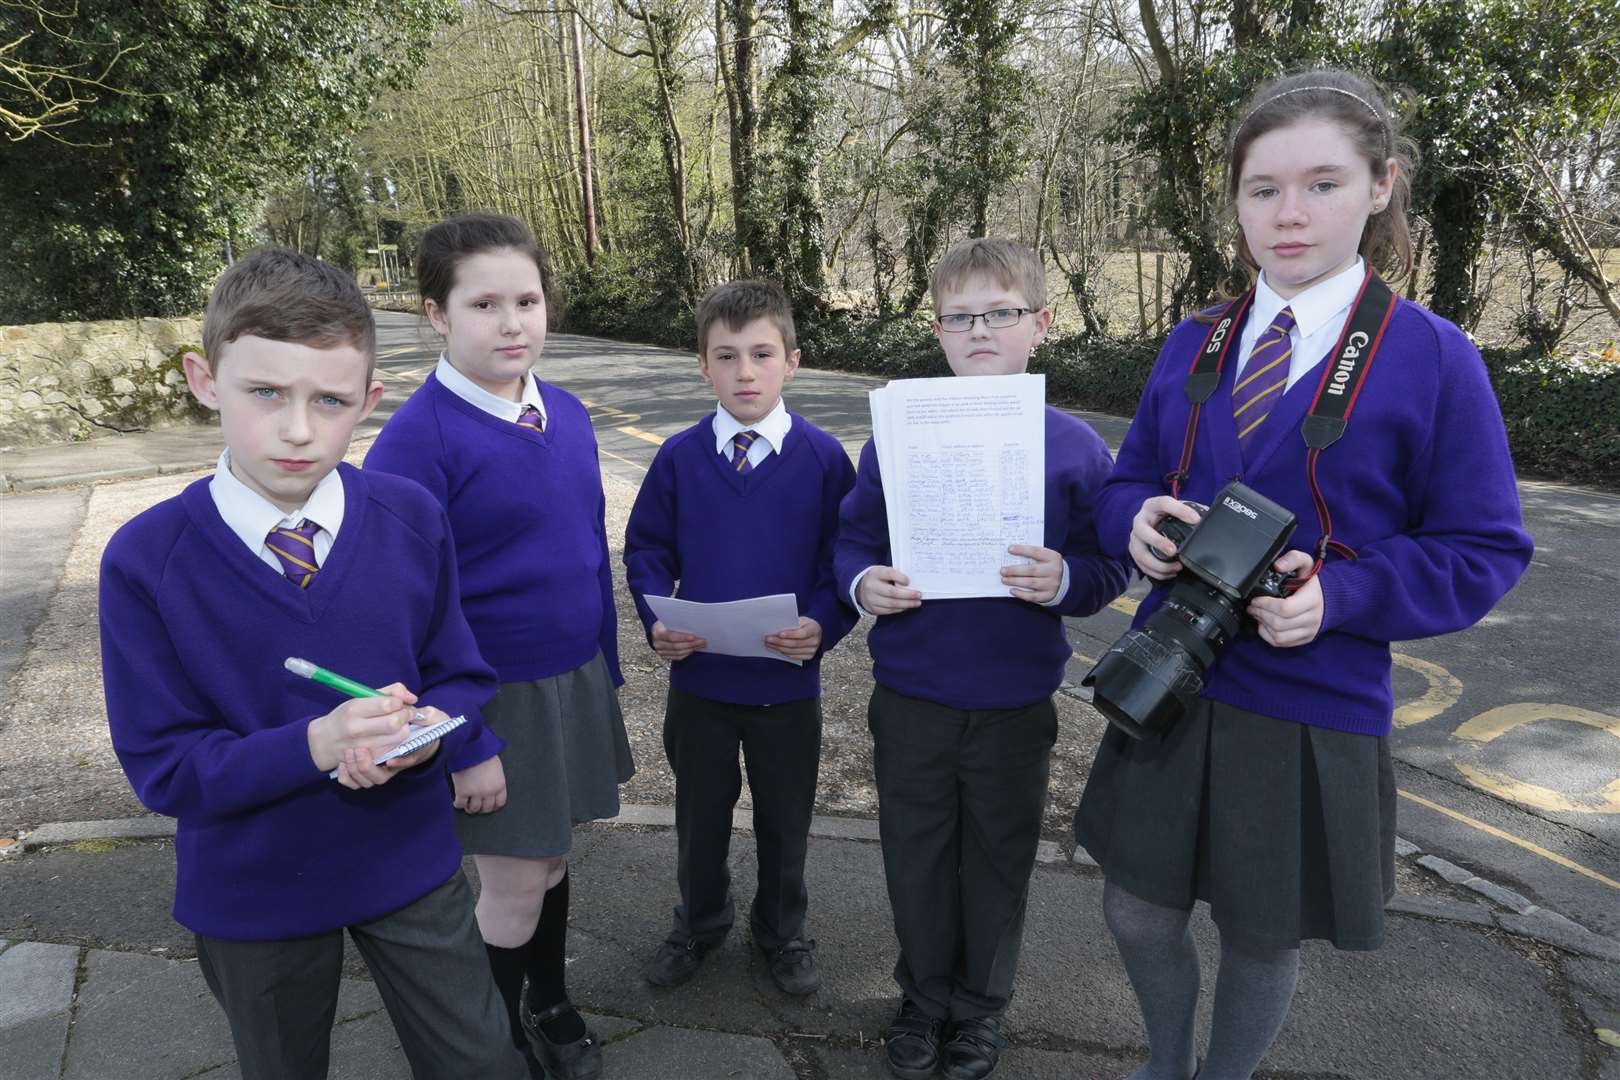 More Park pupils Oliver, Ayla, Sebastian, Lewis, Laren who presented the petition to the council